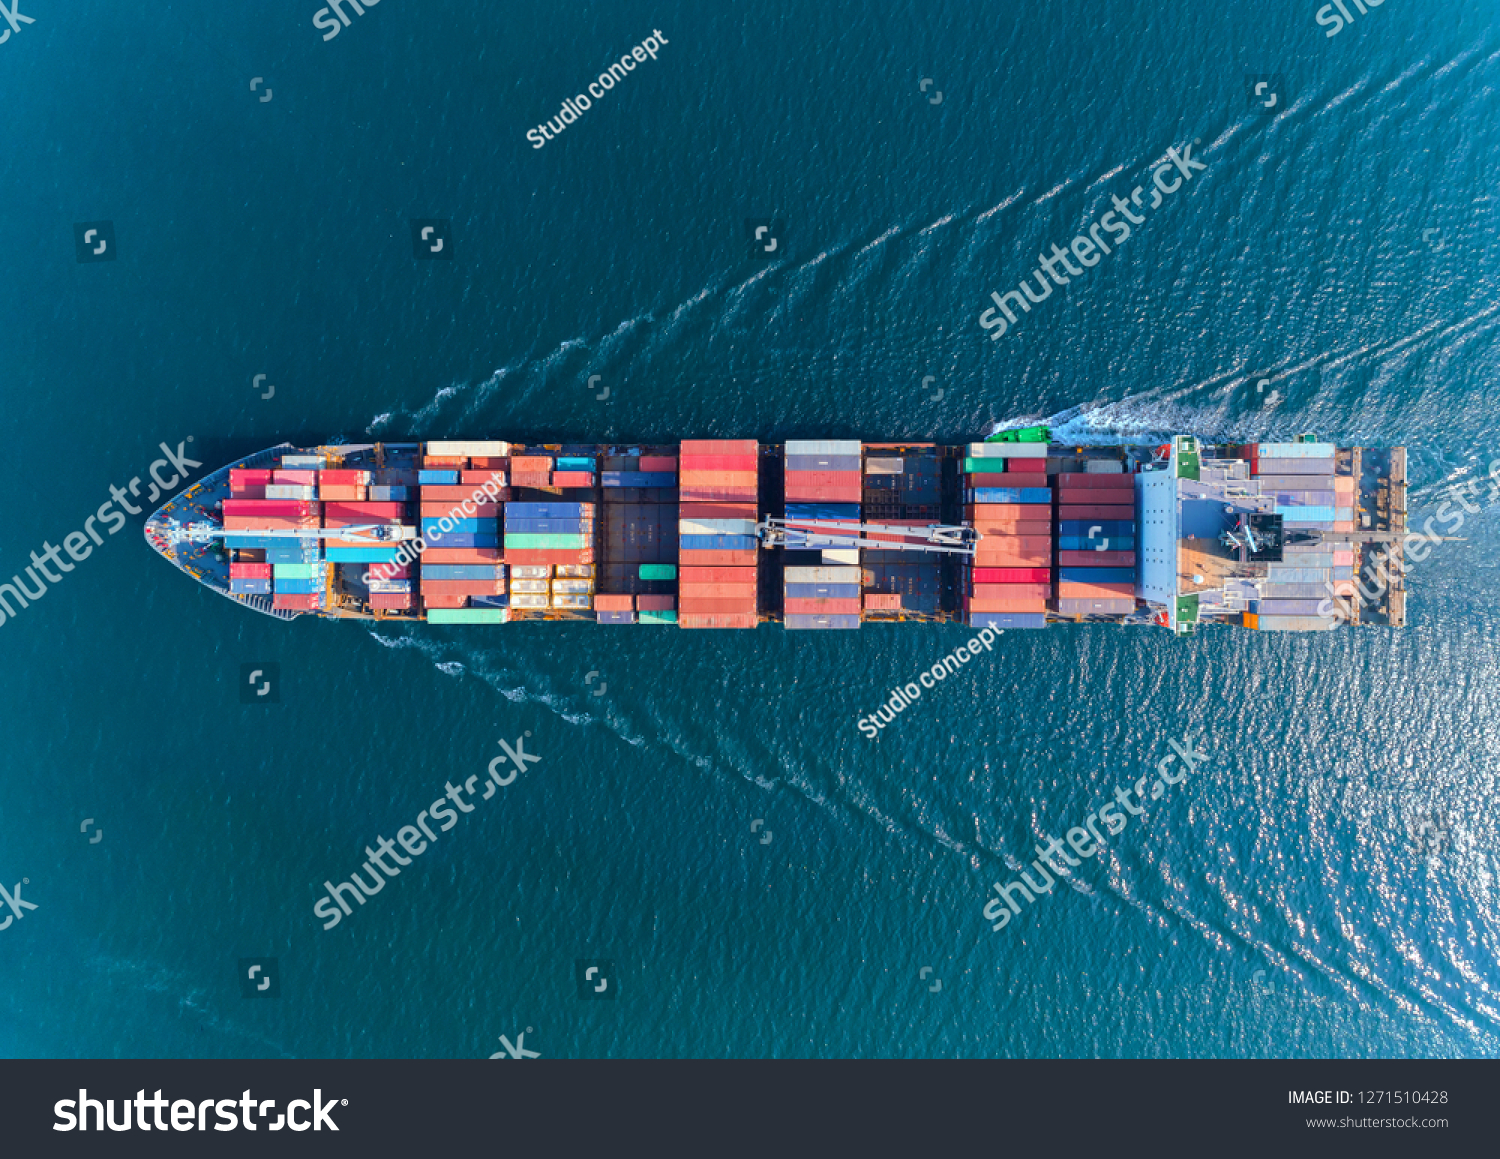 Aerial top view container ship with crane bridge for load container, logistics import export, shipping or transportation concept background. #1271510428